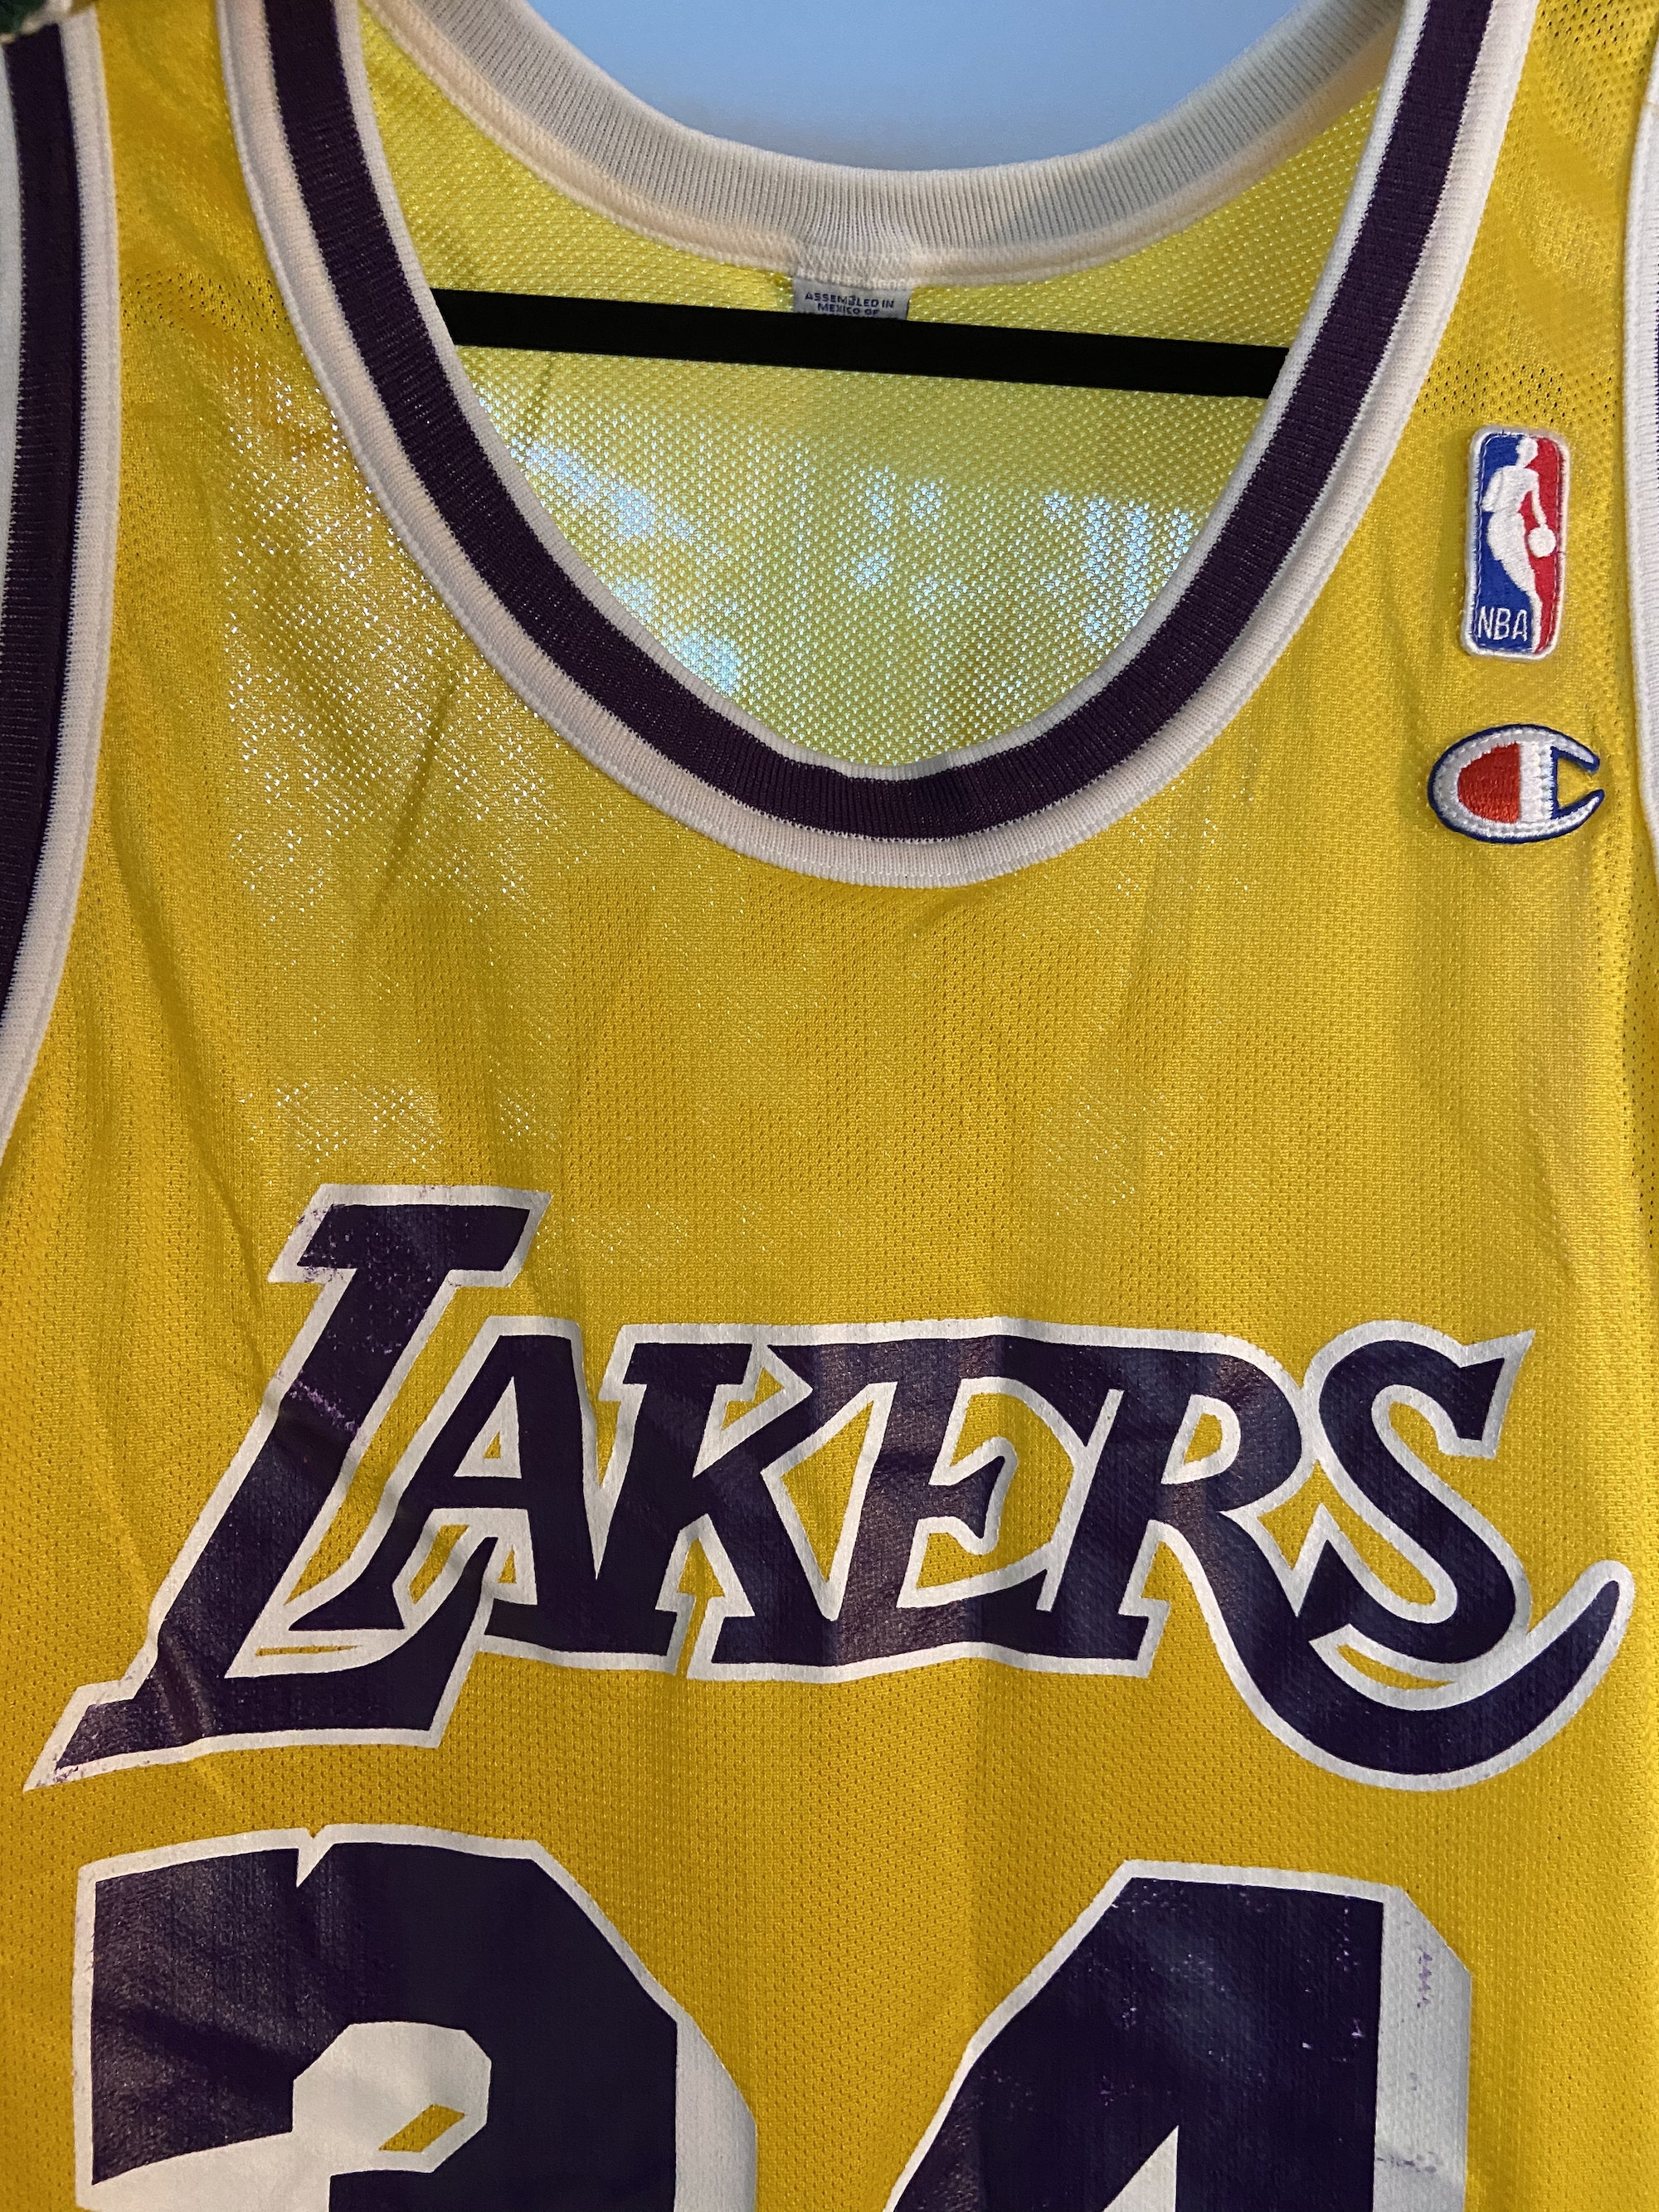 Vintage Lakers Shaquille O'Neal Shaq Champion Jersey Size 44 Purple